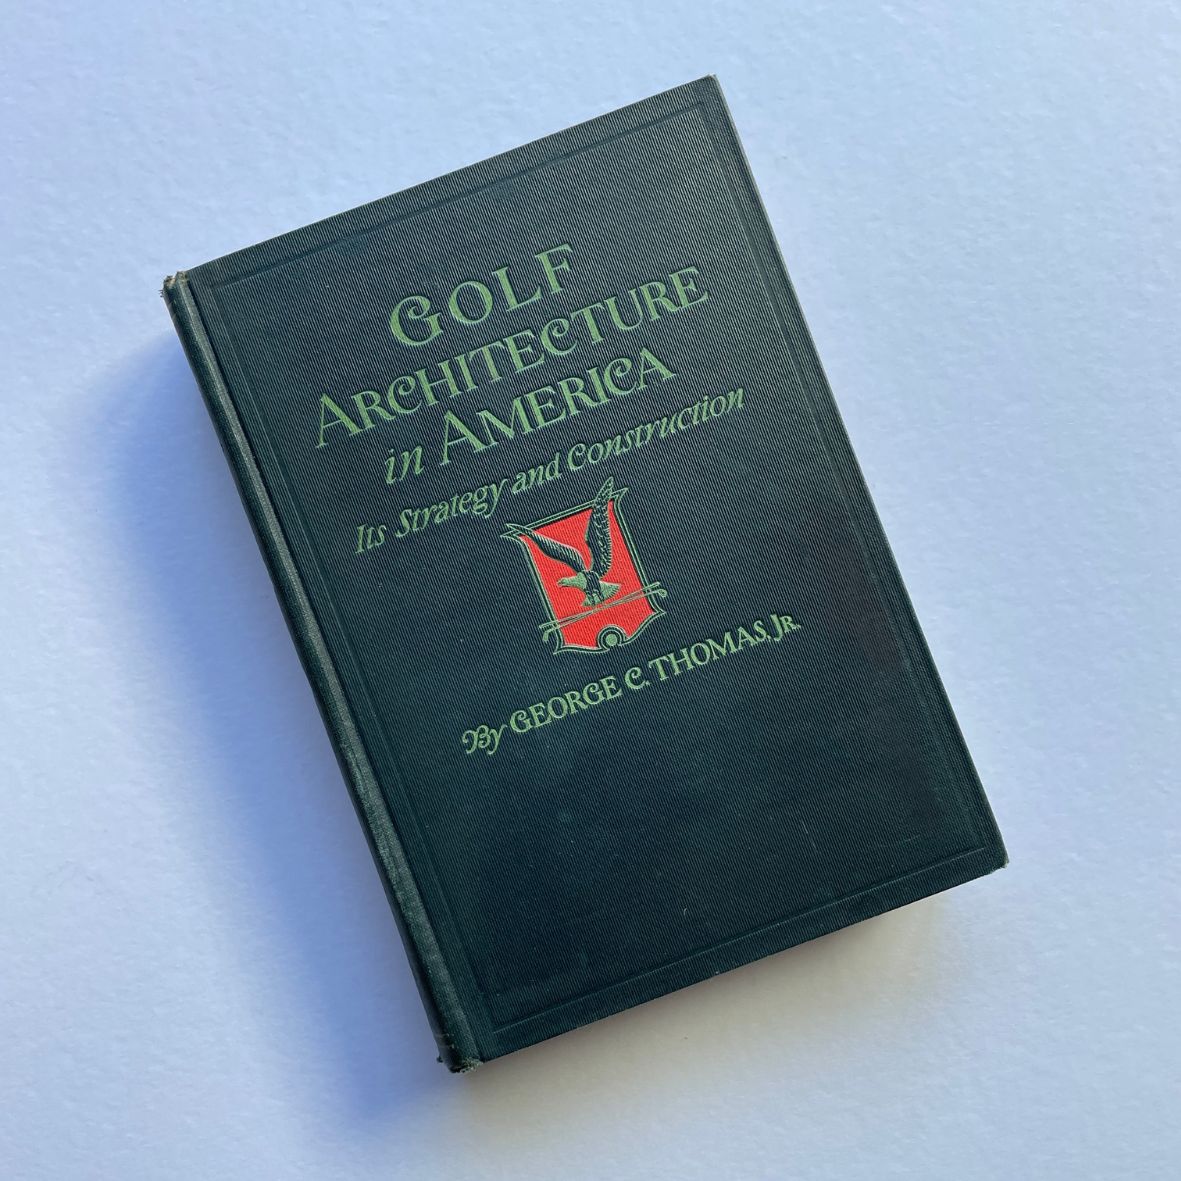 Golf Architecture In America: It's Strategy And Construction - George C. Thomas